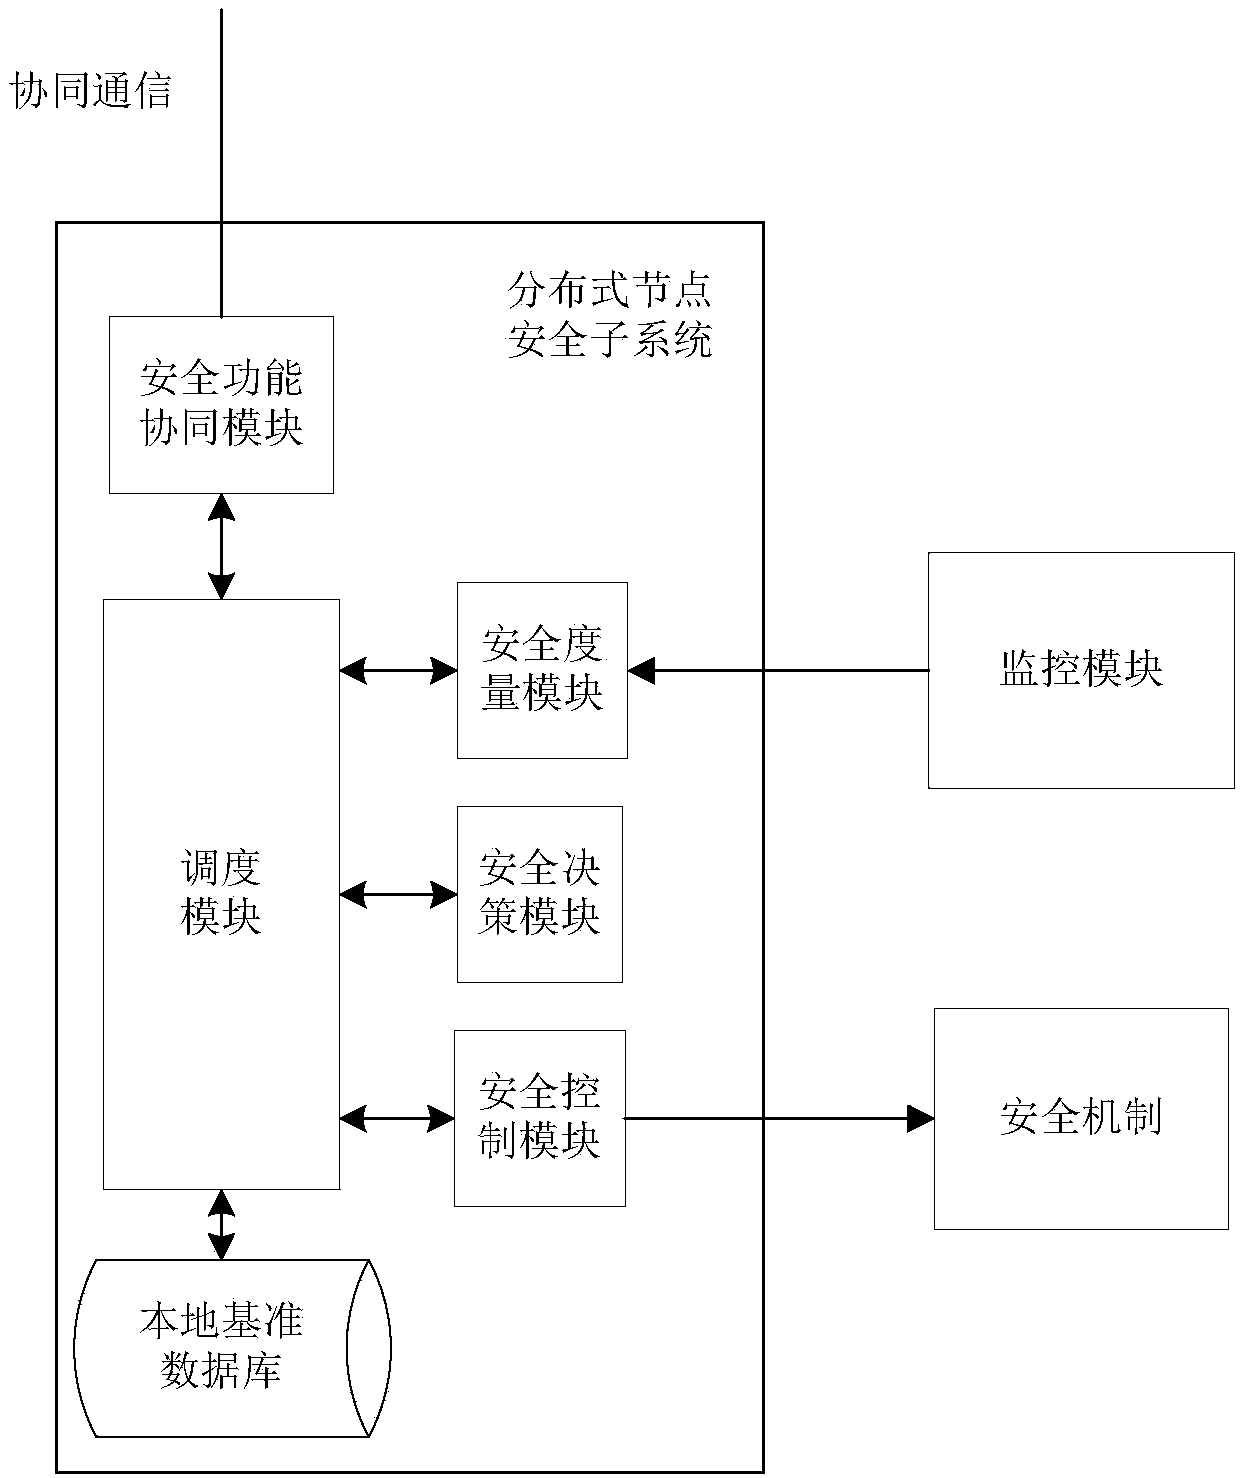 Safety monitoring method under distributed network environment